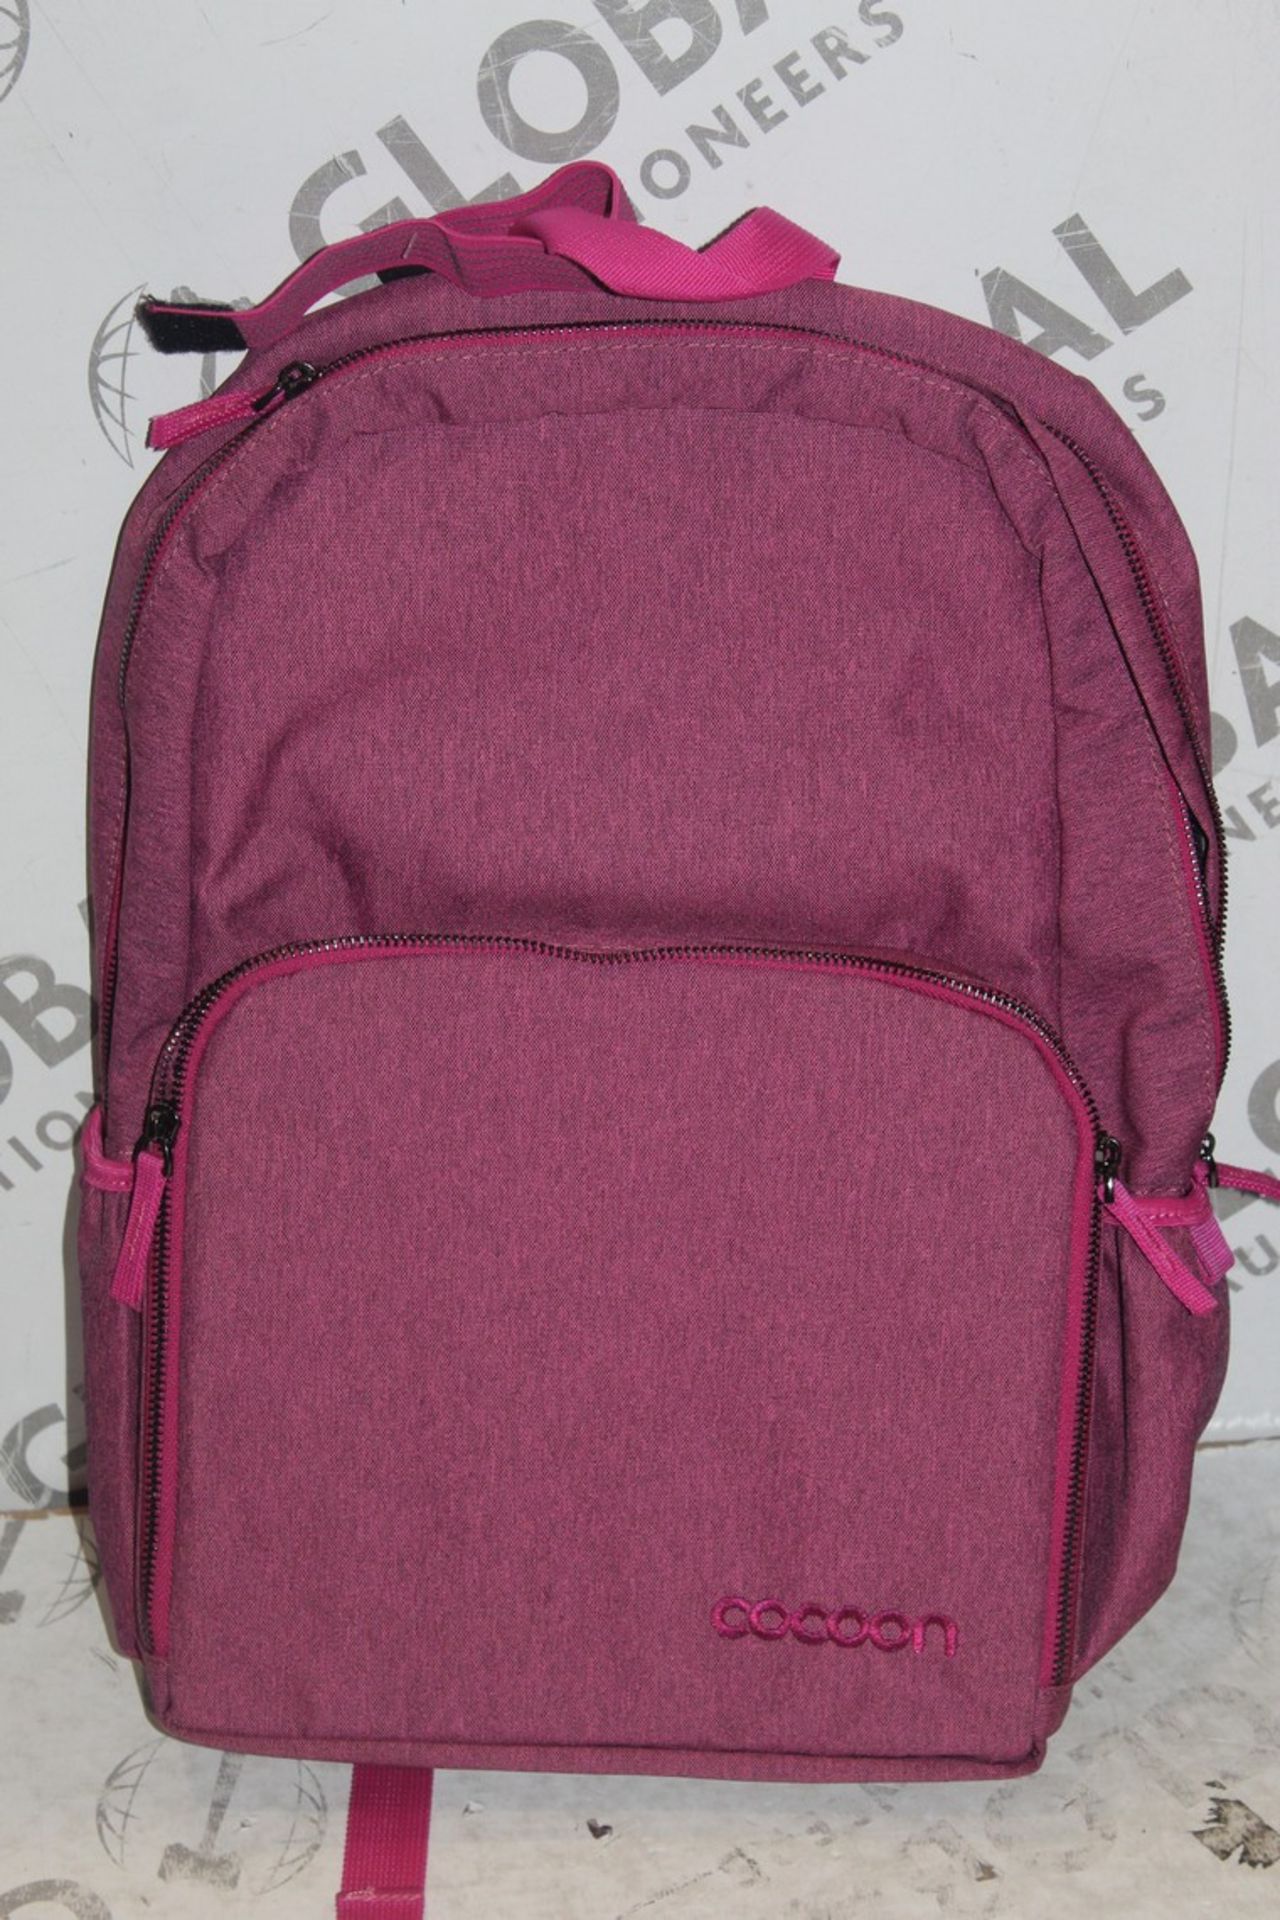 Pink Cocoon 15" iMac and iPad Rucksacks with Built in Grid-It Organisers RRP £80 (Appraisals